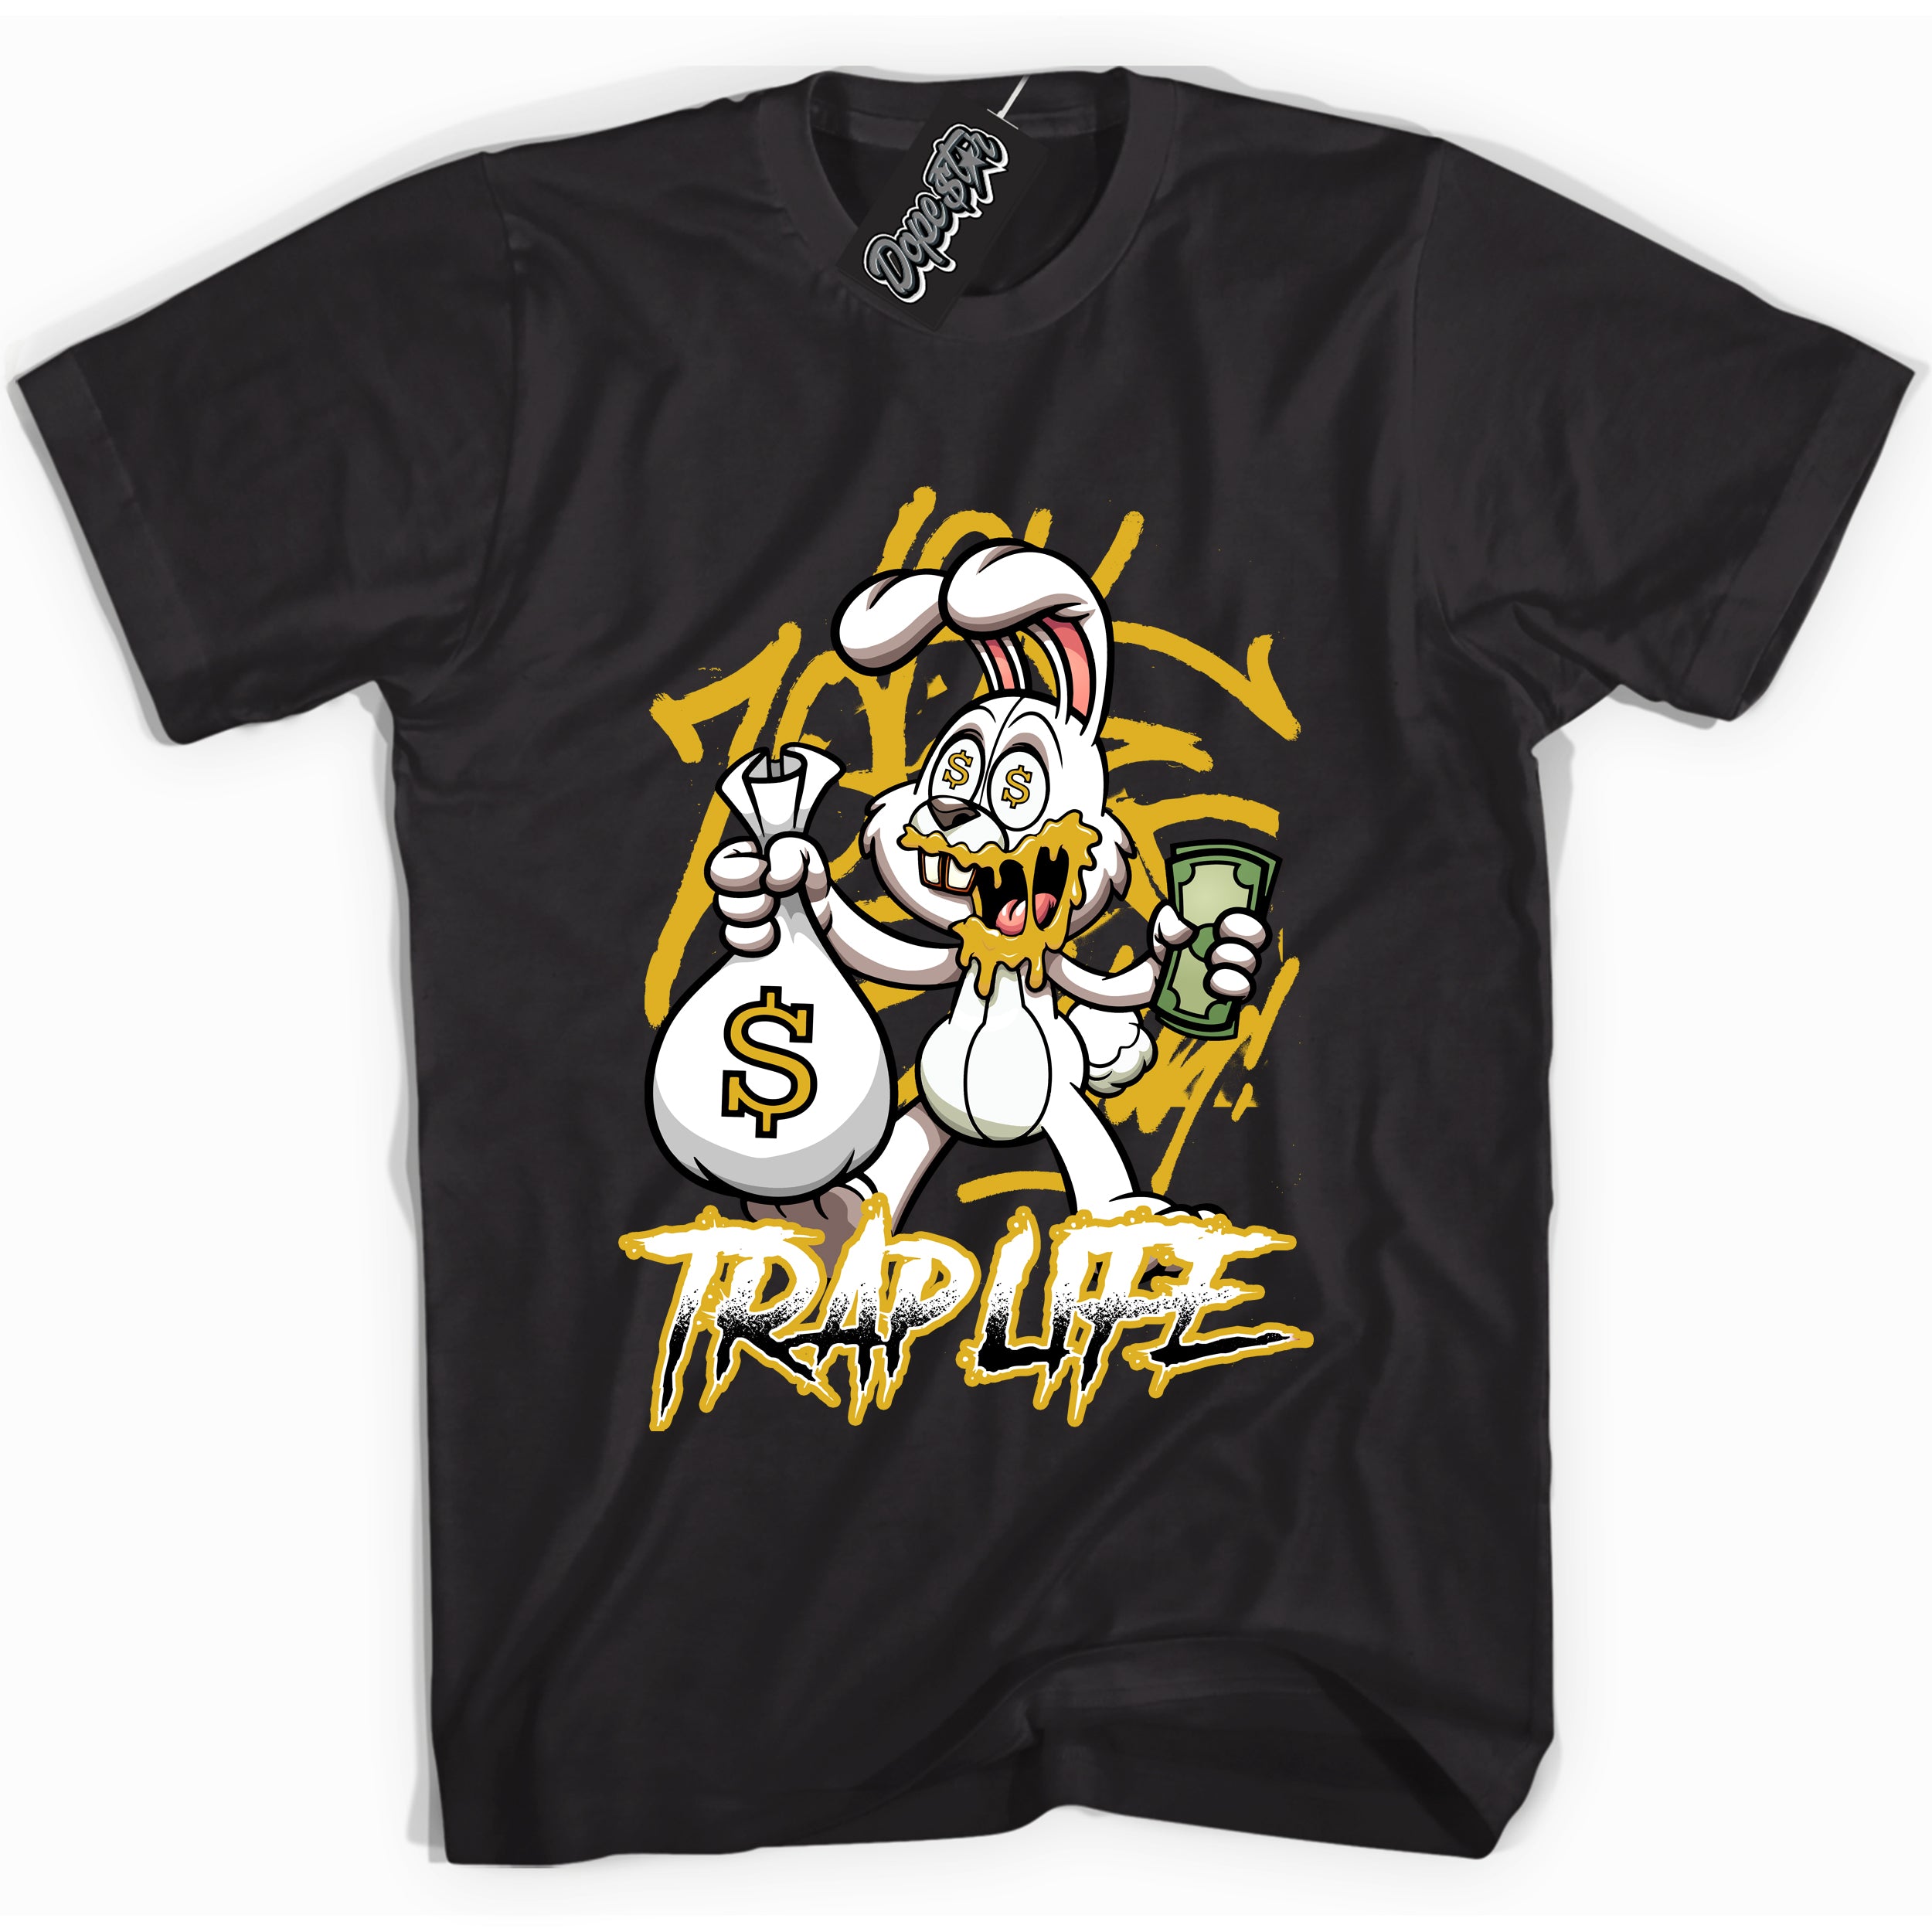 Cool Black Shirt with “ Trap Rabbit ” design that perfectly matches Yellow Ochre 6s Sneakers.